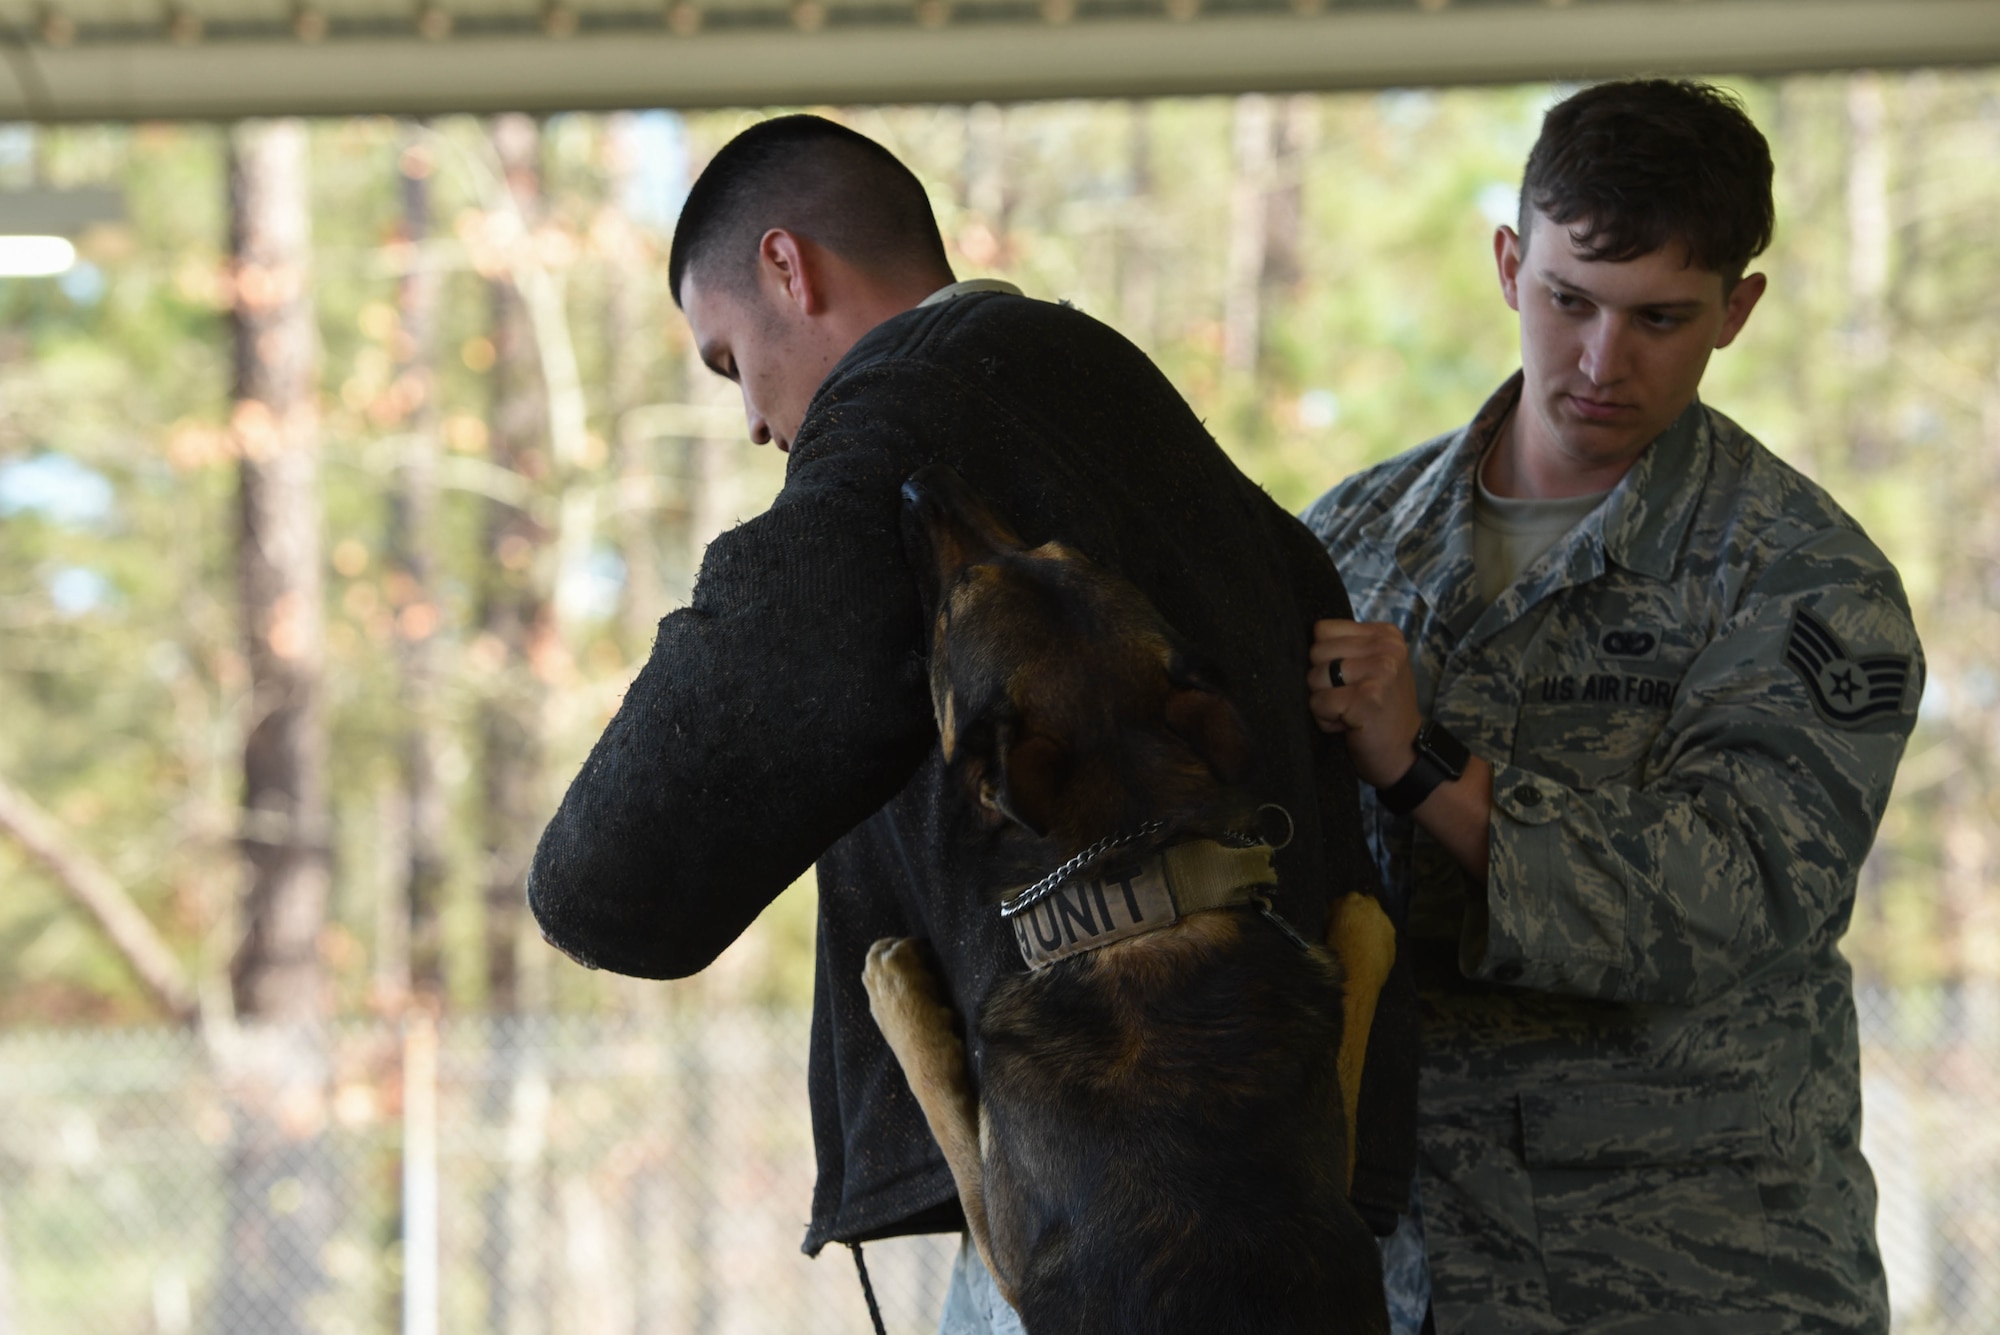 U.S. Air Force Senior Airman Juan Gamboa, 20th Security Forces Squadron (SFS) military working dog (MWD) handler, stands in a bite suit while MWD Kato bites his arm and Staff Sgt. Eric Sweat, 20th SFS MWD handler, holds his other arm at Shaw Air Force Base, S.C., Feb. 27, 2018.